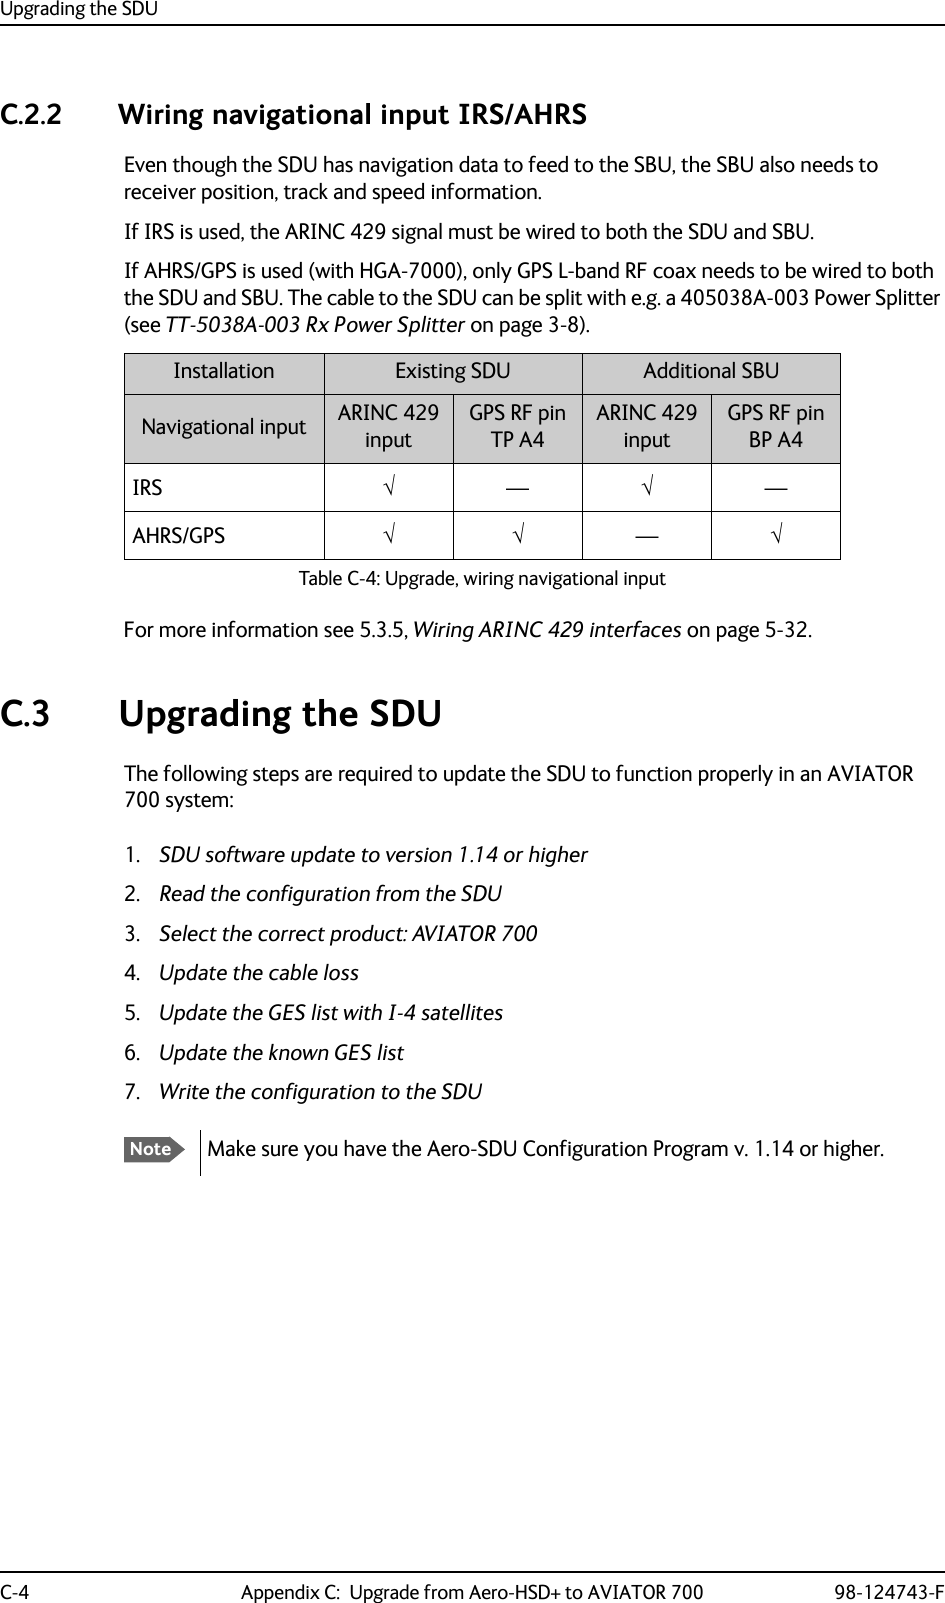 Upgrading the SDUC-4 Appendix C:  Upgrade from Aero-HSD+ to AVIATOR 700 98-124743-FC.2.2 Wiring navigational input IRS/AHRSEven though the SDU has navigation data to feed to the SBU, the SBU also needs to receiver position, track and speed information. If IRS is used, the ARINC 429 signal must be wired to both the SDU and SBU.If AHRS/GPS is used (with HGA-7000), only GPS L-band RF coax needs to be wired to both the SDU and SBU. The cable to the SDU can be split with e.g. a 405038A-003 Power Splitter (see TT-5038A-003 Rx Power Splitter on page 3-8).Table C-4: Upgrade, wiring navigational inputInstallation Existing SDU Additional SBUNavigational input ARINC 429inputGPS RF pinTP A4ARINC 429inputGPS RF pinBP A4IRSAHRS/GPSFor more information see 5.3.5, Wiring ARINC 429 interfaces on page 5-32.C.3 Upgrading the SDUThe following steps are required to update the SDU to function properly in an AVIATOR 700 system:1. SDU software update to version 1.14 or higher2. Read the configuration from the SDU3. Select the correct product: AVIATOR 7004. Update the cable loss5. Update the GES list with I-4 satellites6. Update the known GES list7. Write the configuration to the SDU———NoteMake sure you have the Aero-SDU Configuration Program v. 1.14 or higher.